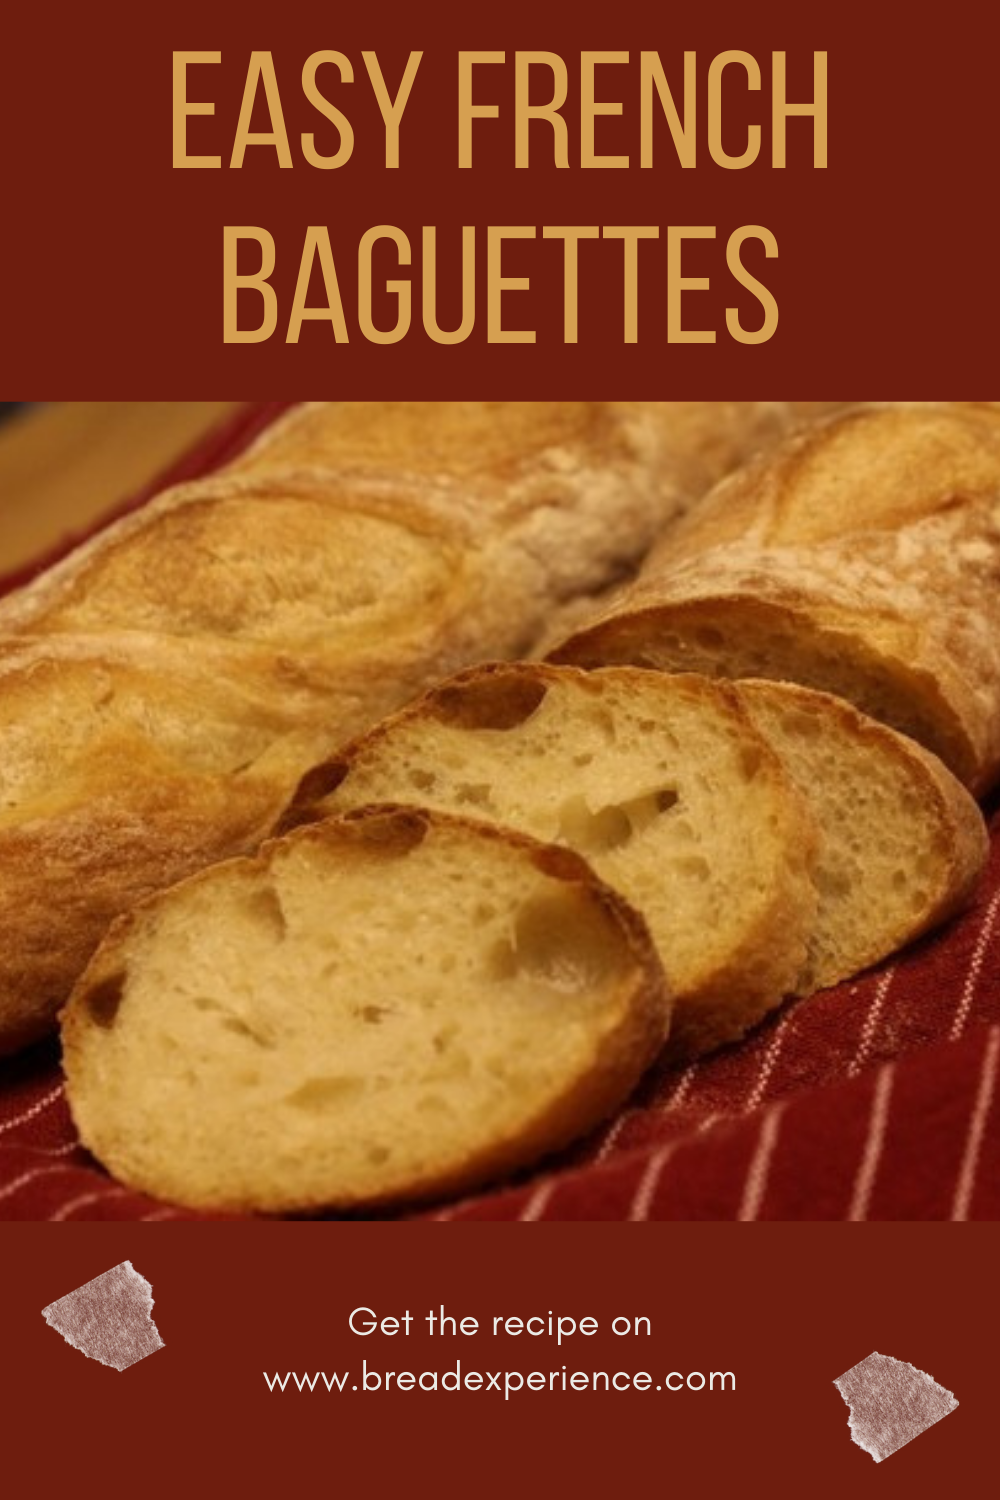 Easy French Baguettes